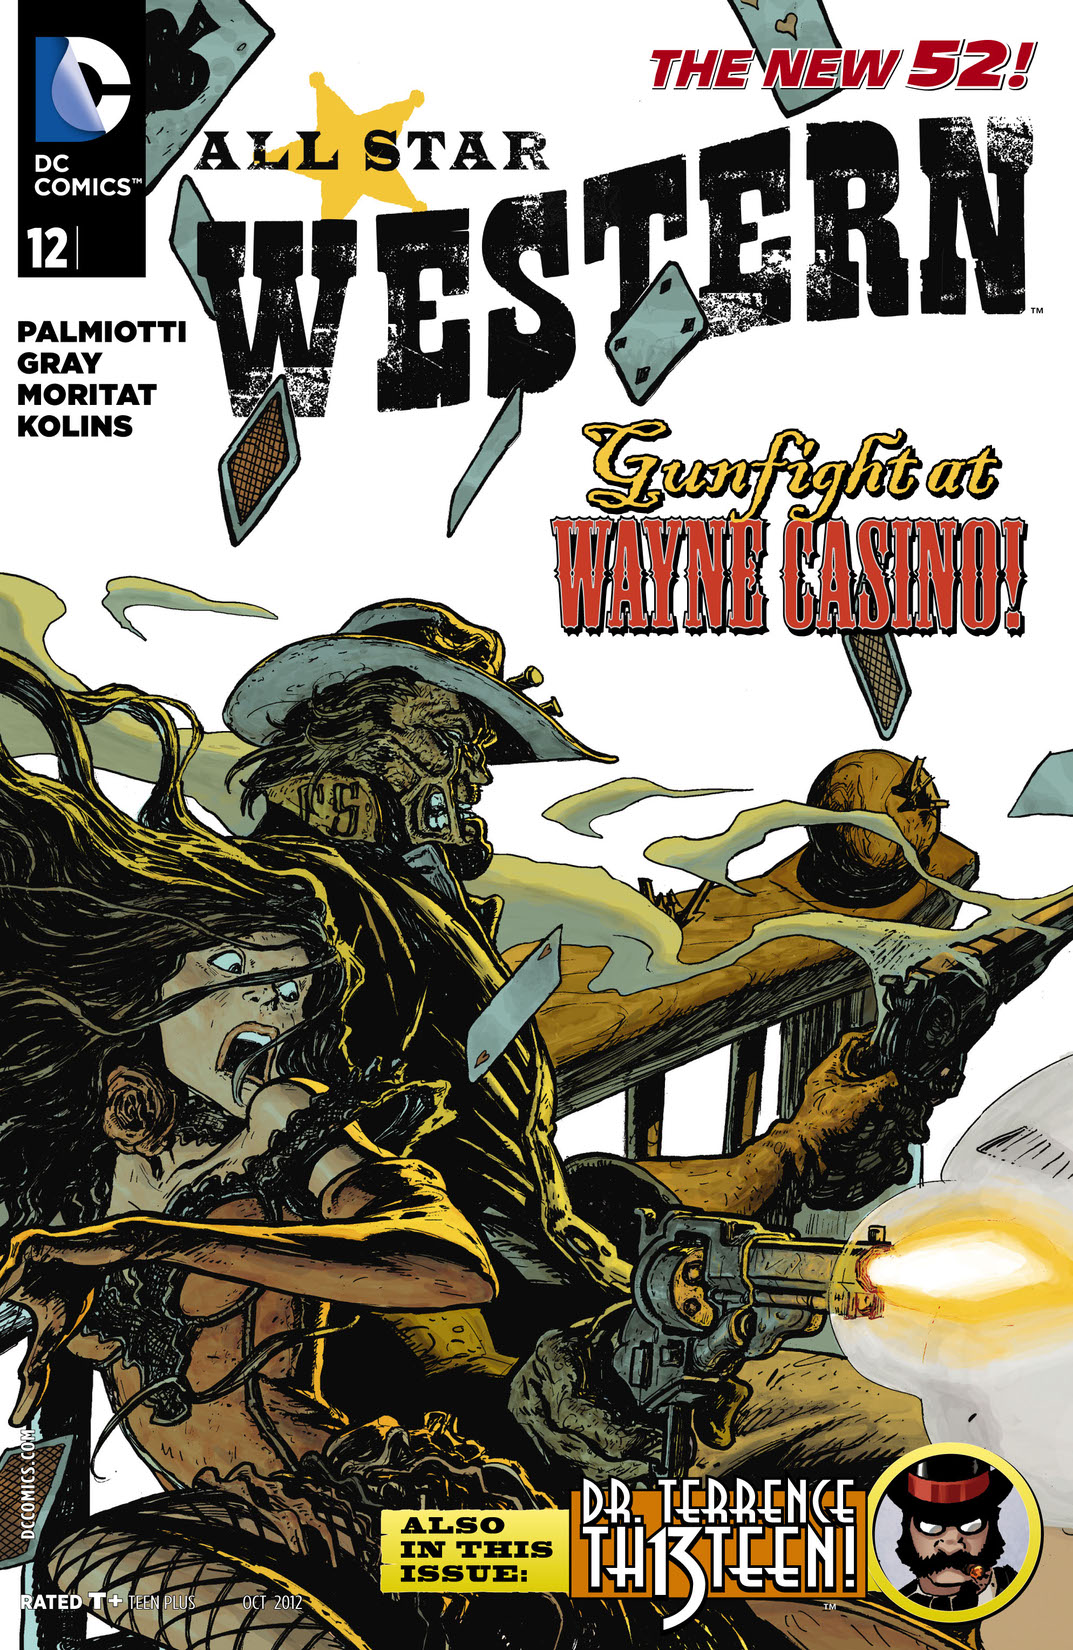 All Star Western #12 preview images